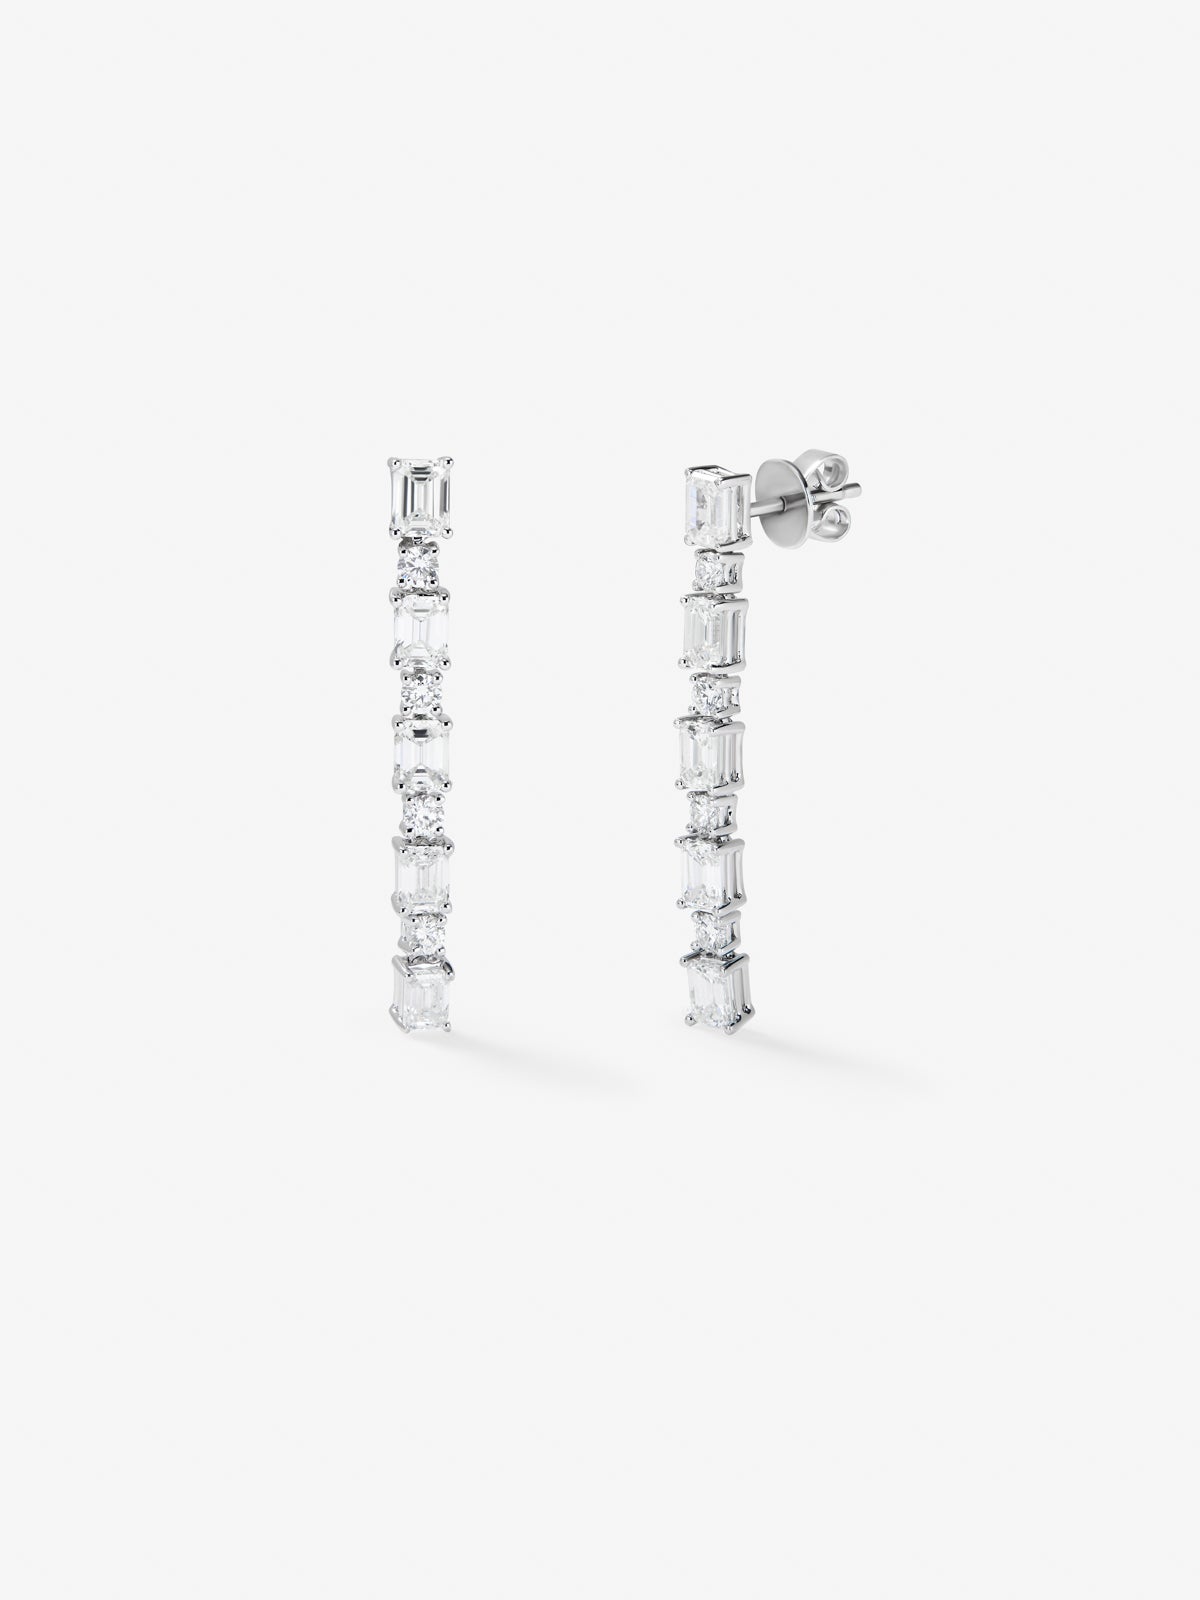 18K white gold earrings with white diamonds in emerald size 3.21 cts and diamonds in bright 0.5 cts